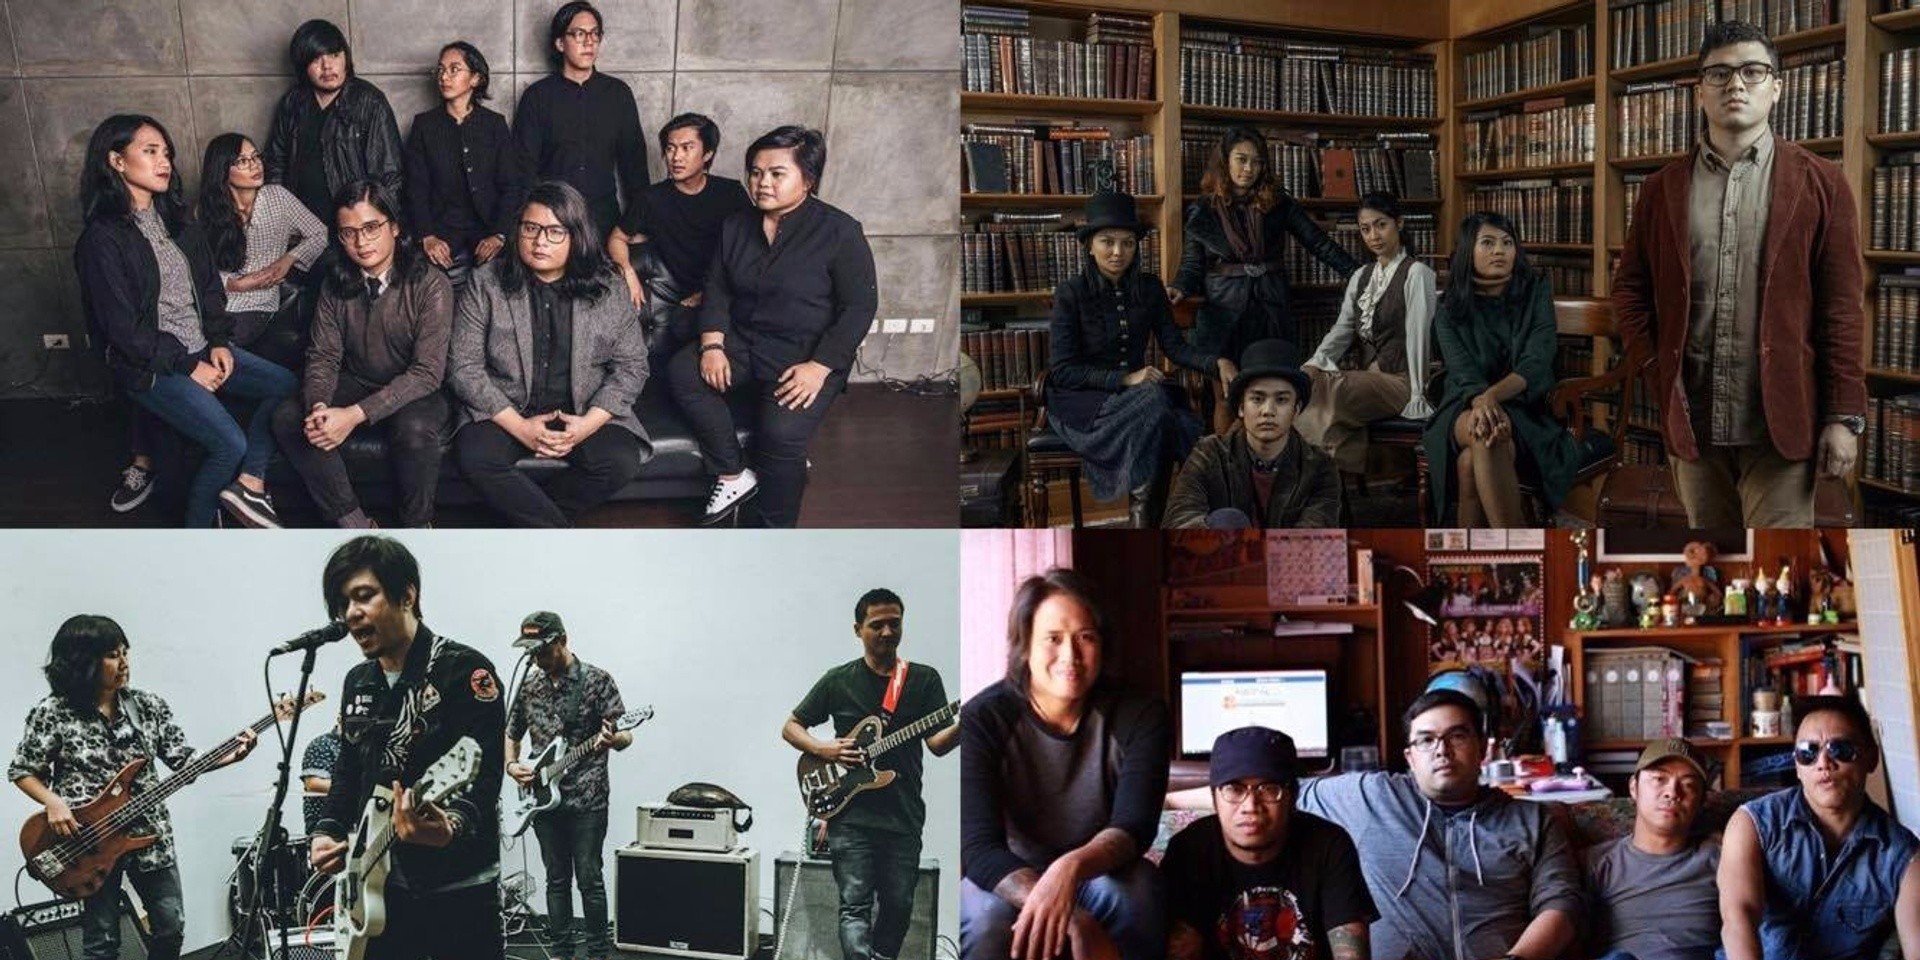 Ben&Ben, Sandwich, The Ransom Collective, and more confirmed for ASEAN regional showcase